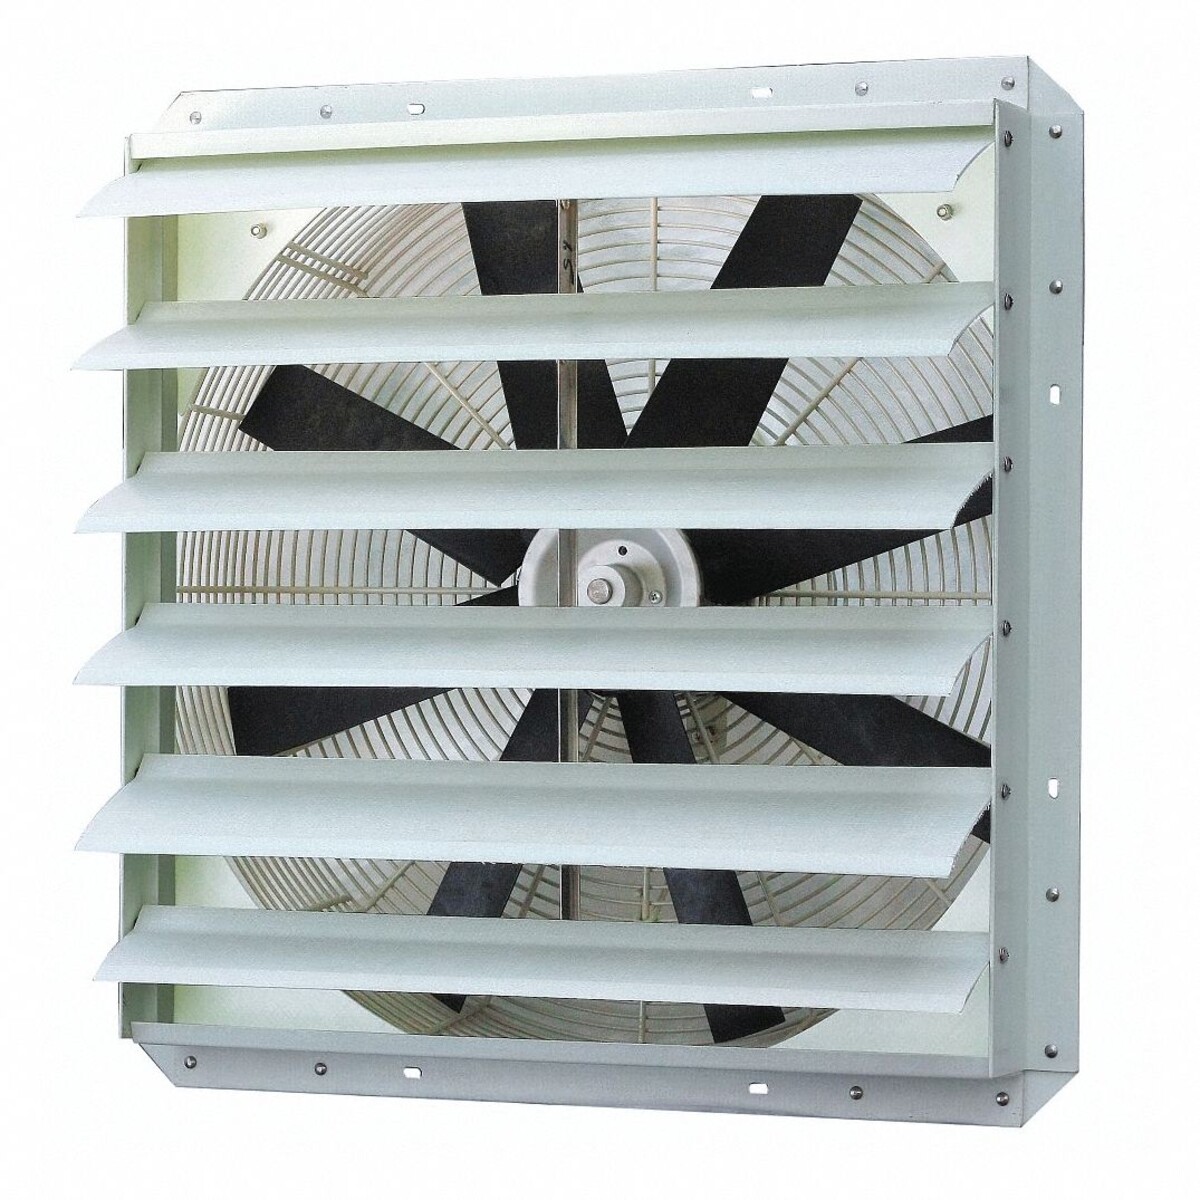 What Is An Exhaust Fan Used For